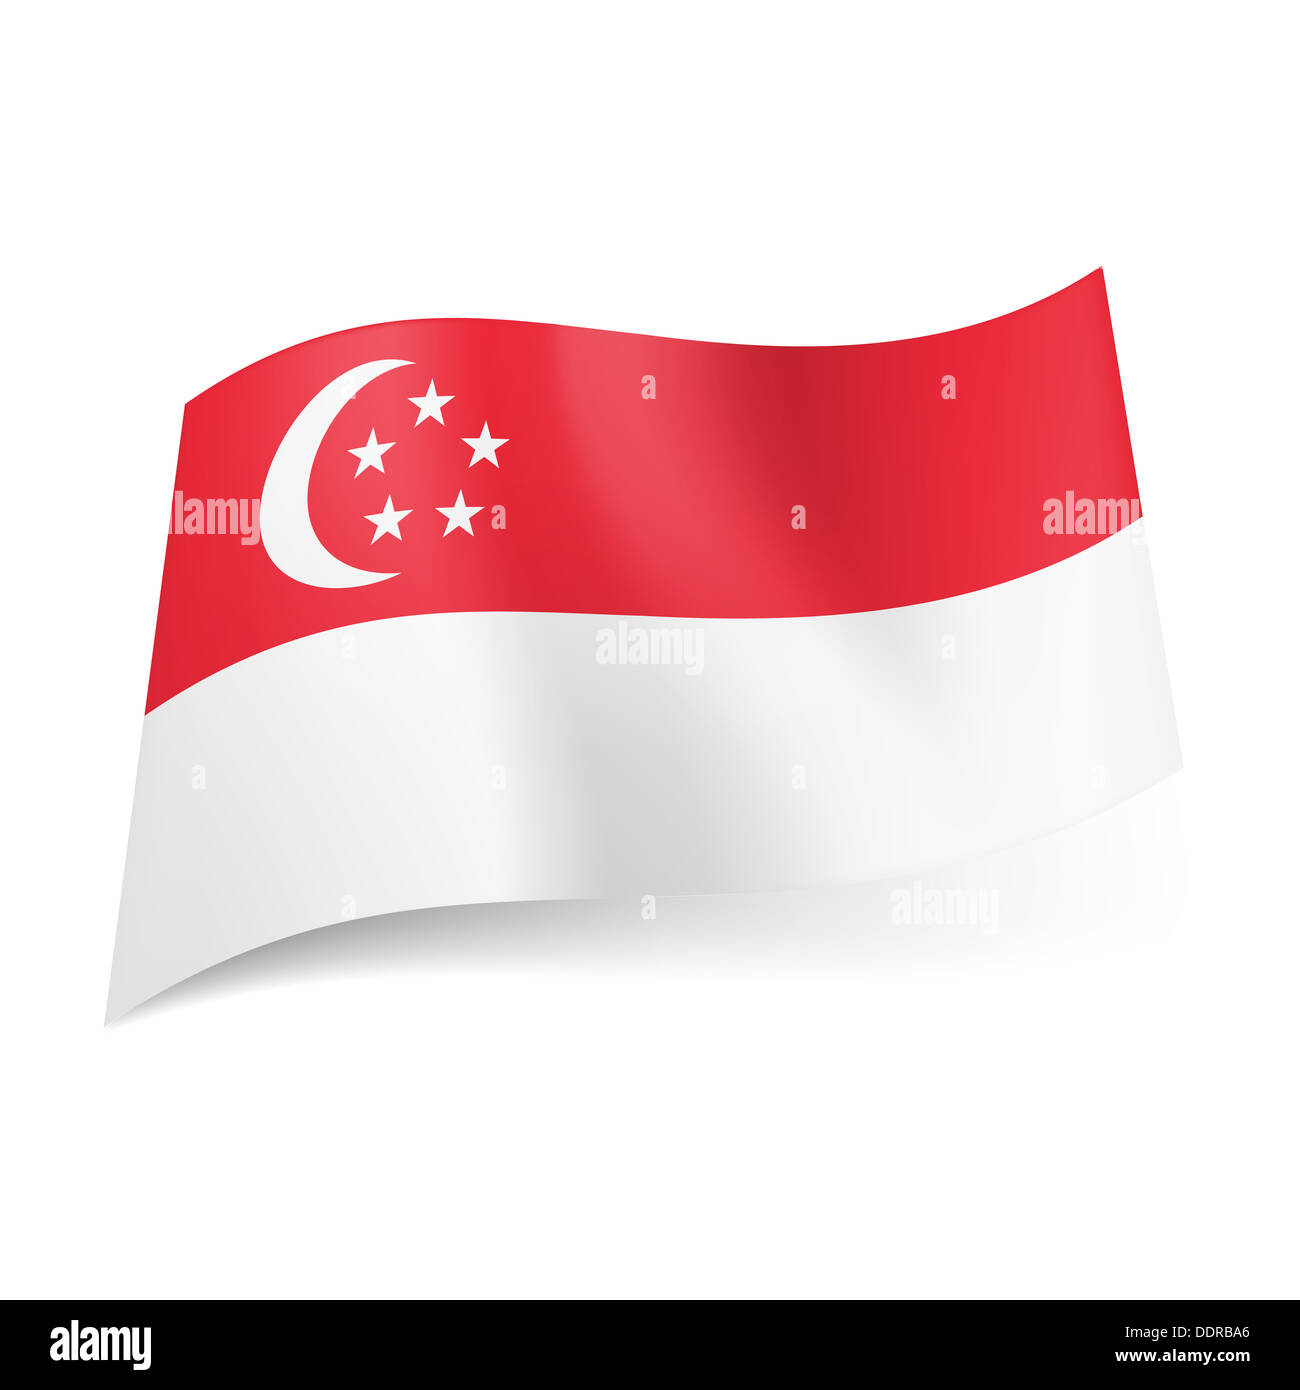 National flag of Singapore: red stripe with crescent moon and five stars in circle above white one Photo - Alamy